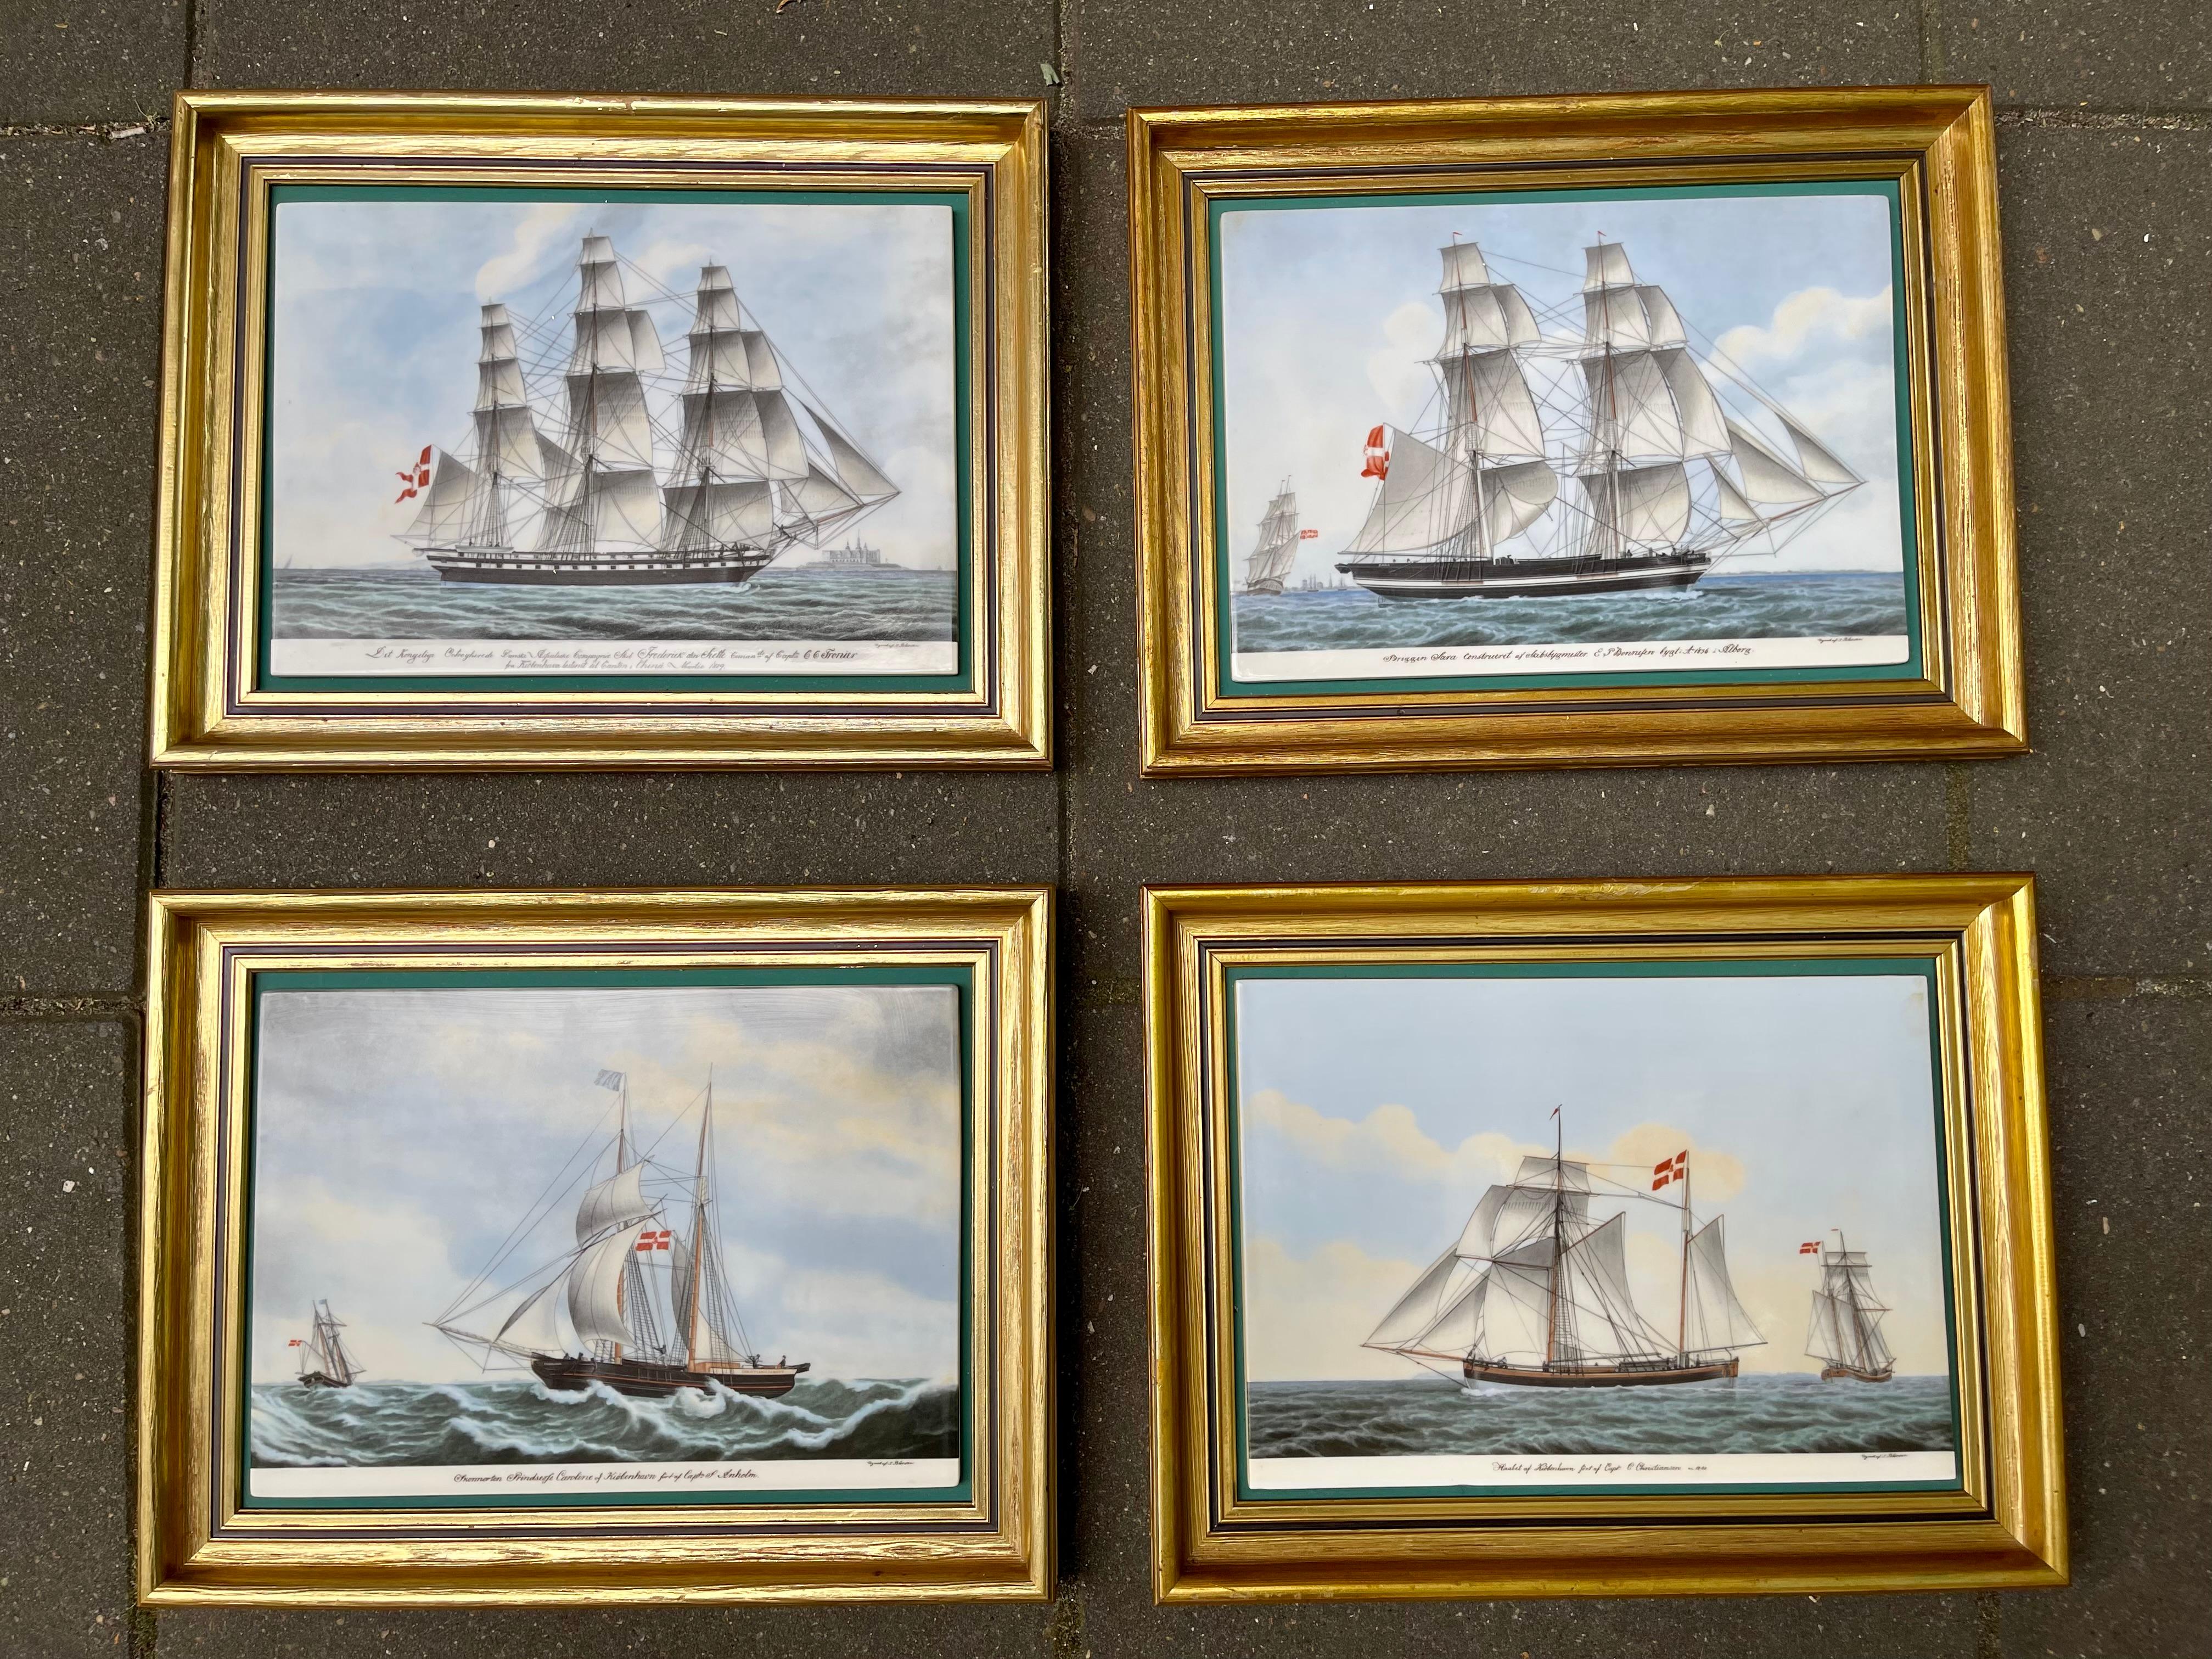 The Danish Ship portrait masterJakob Petersen (1774 - 1855), student of C. W. Eckerberg made these images on consignment during the 19th century. In association with The Commerce and Shipping Museum Bing & Grondahl made these porcelain images during